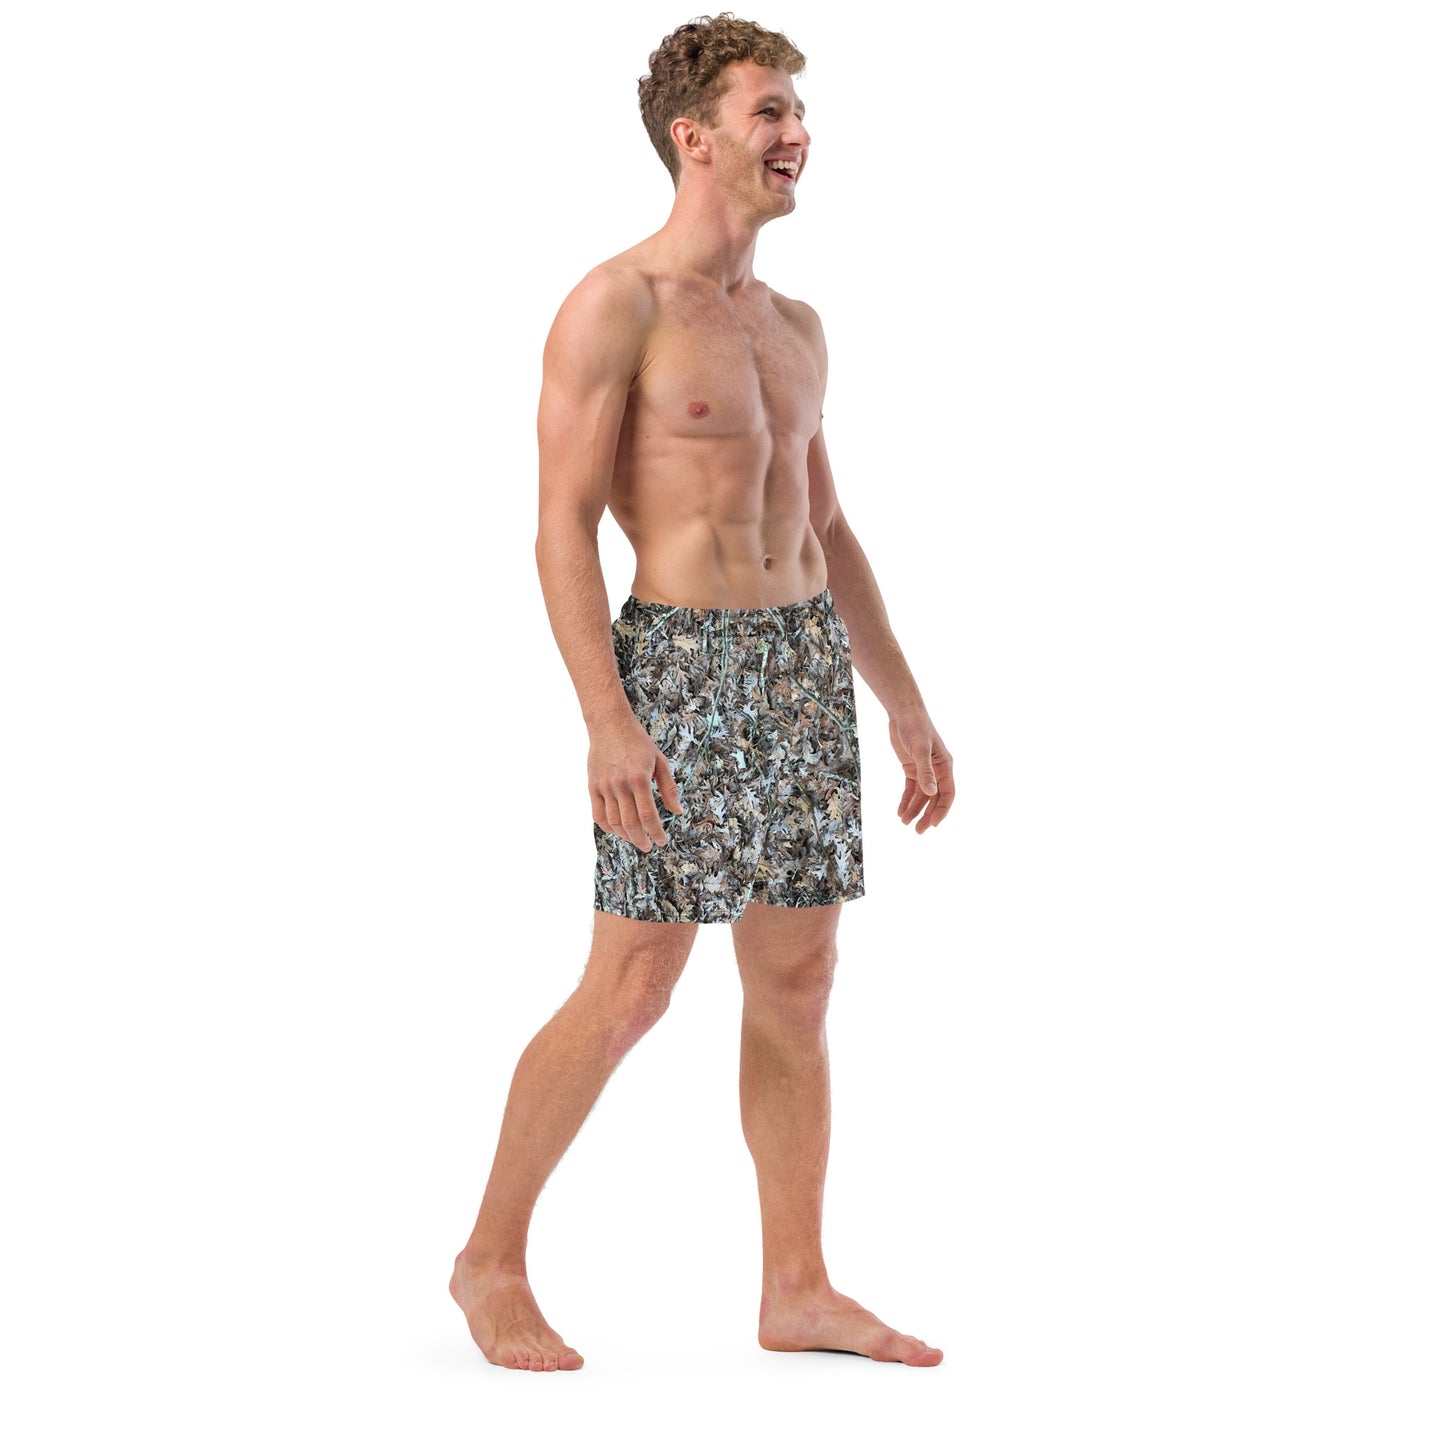 Southern Cameaux Ground Cover Men's swim trunks